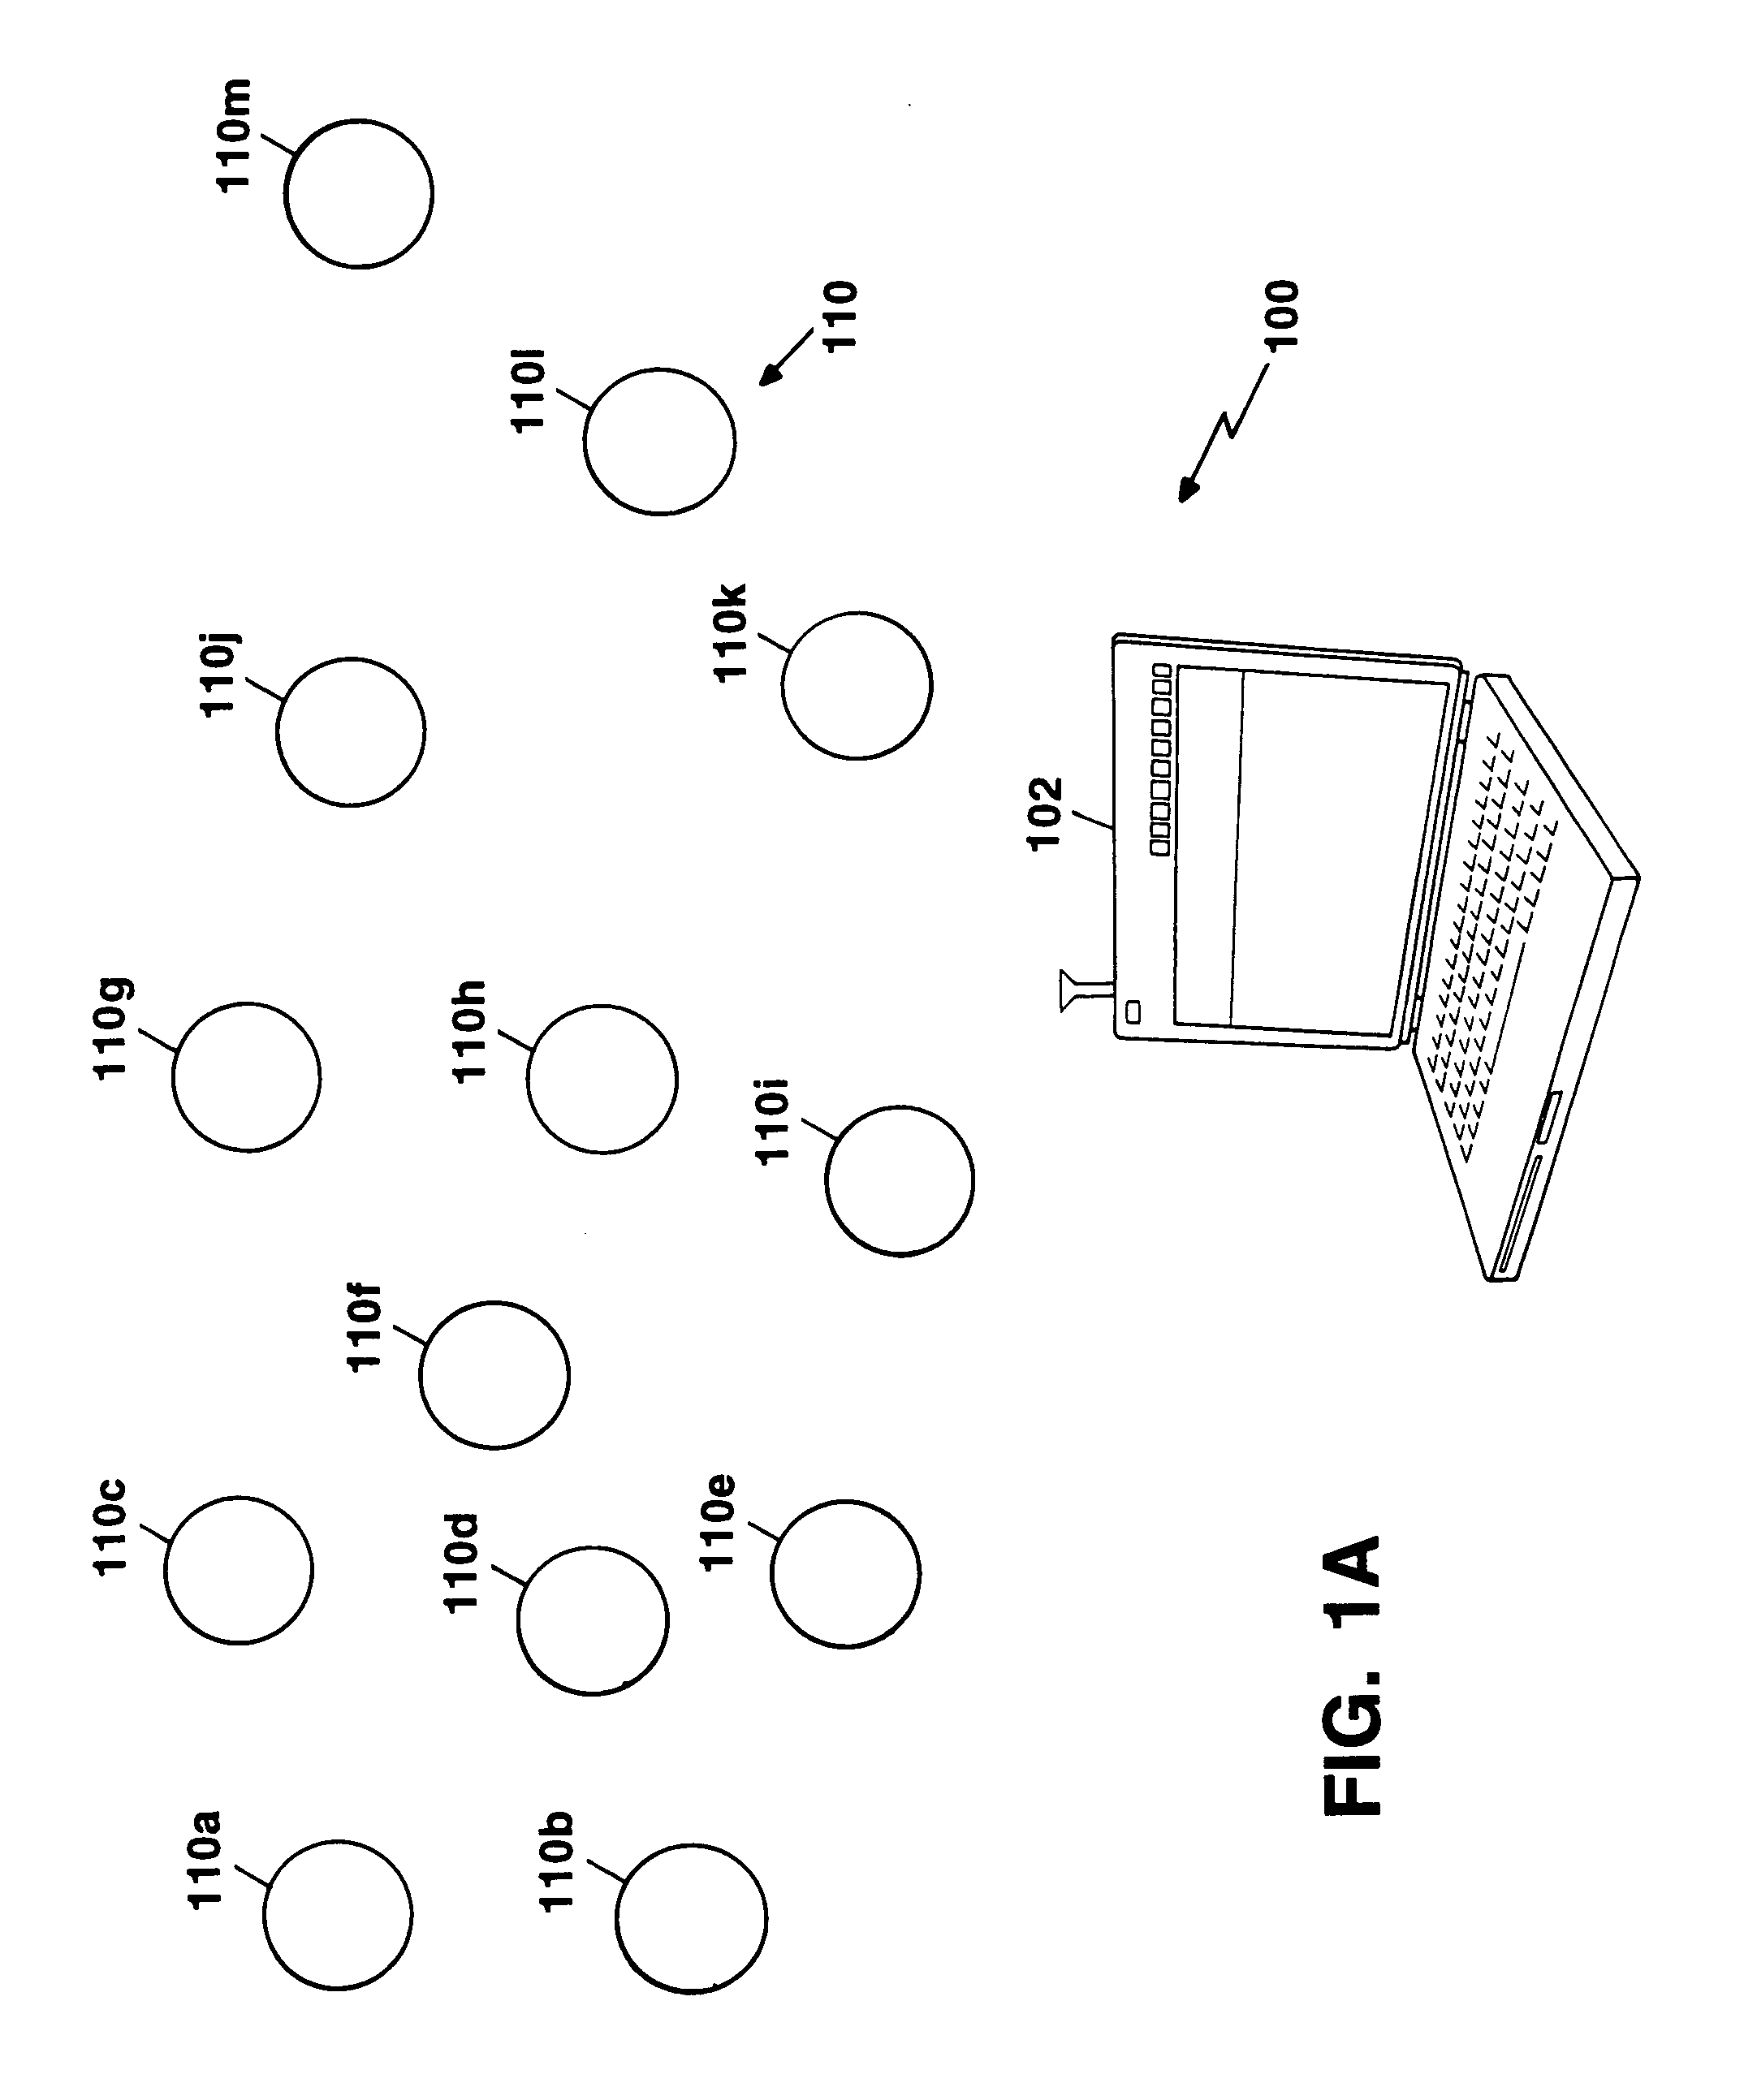 Method for low-energy adaptive clustering hierarchy